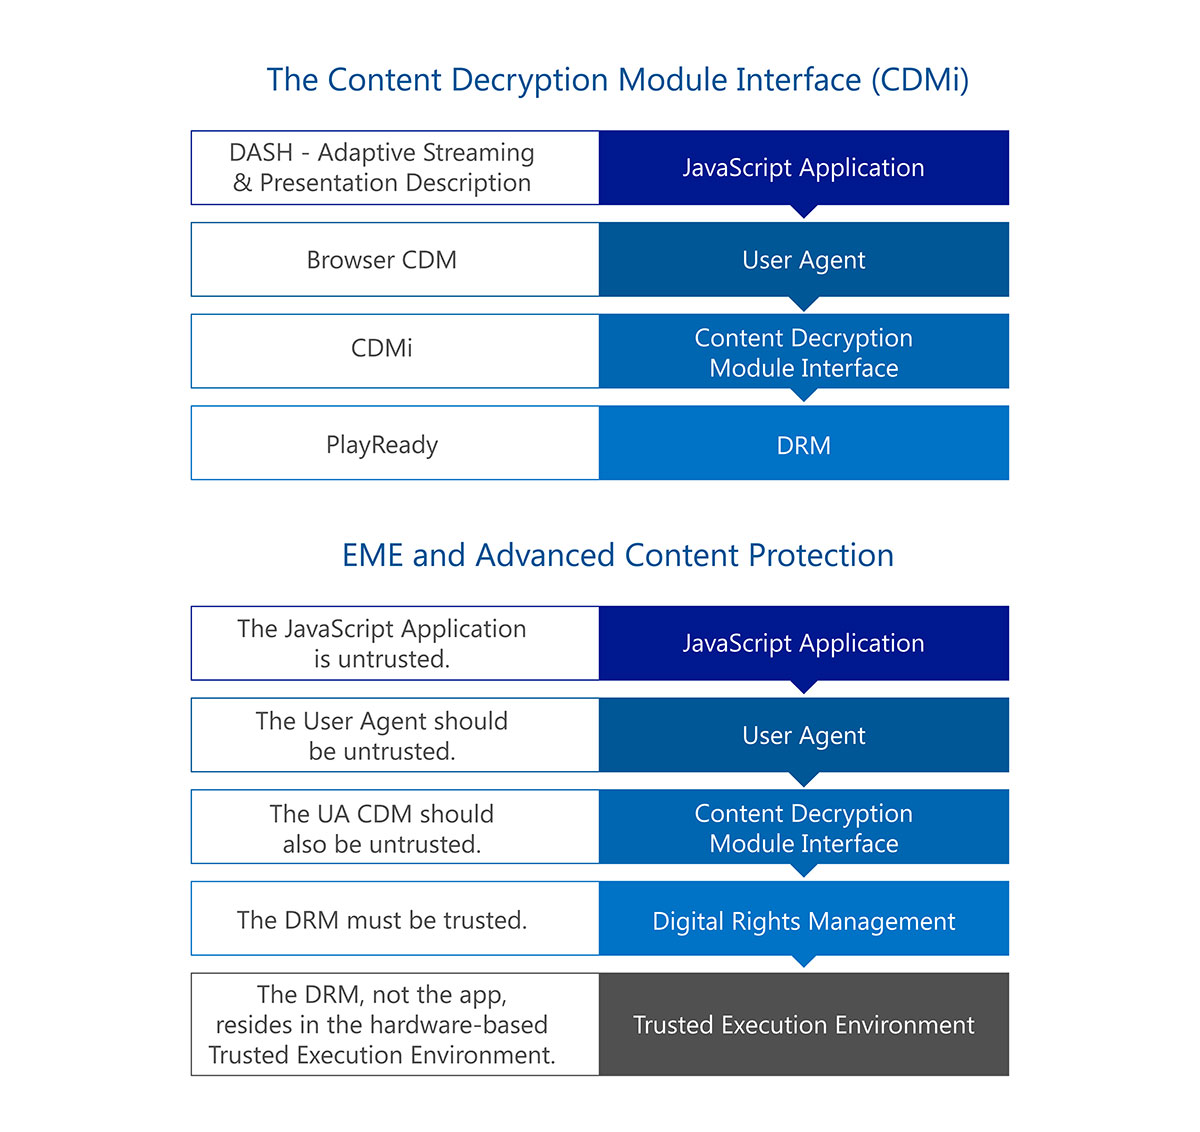 The Content Decryption Module Interface (CDMi) for Scale